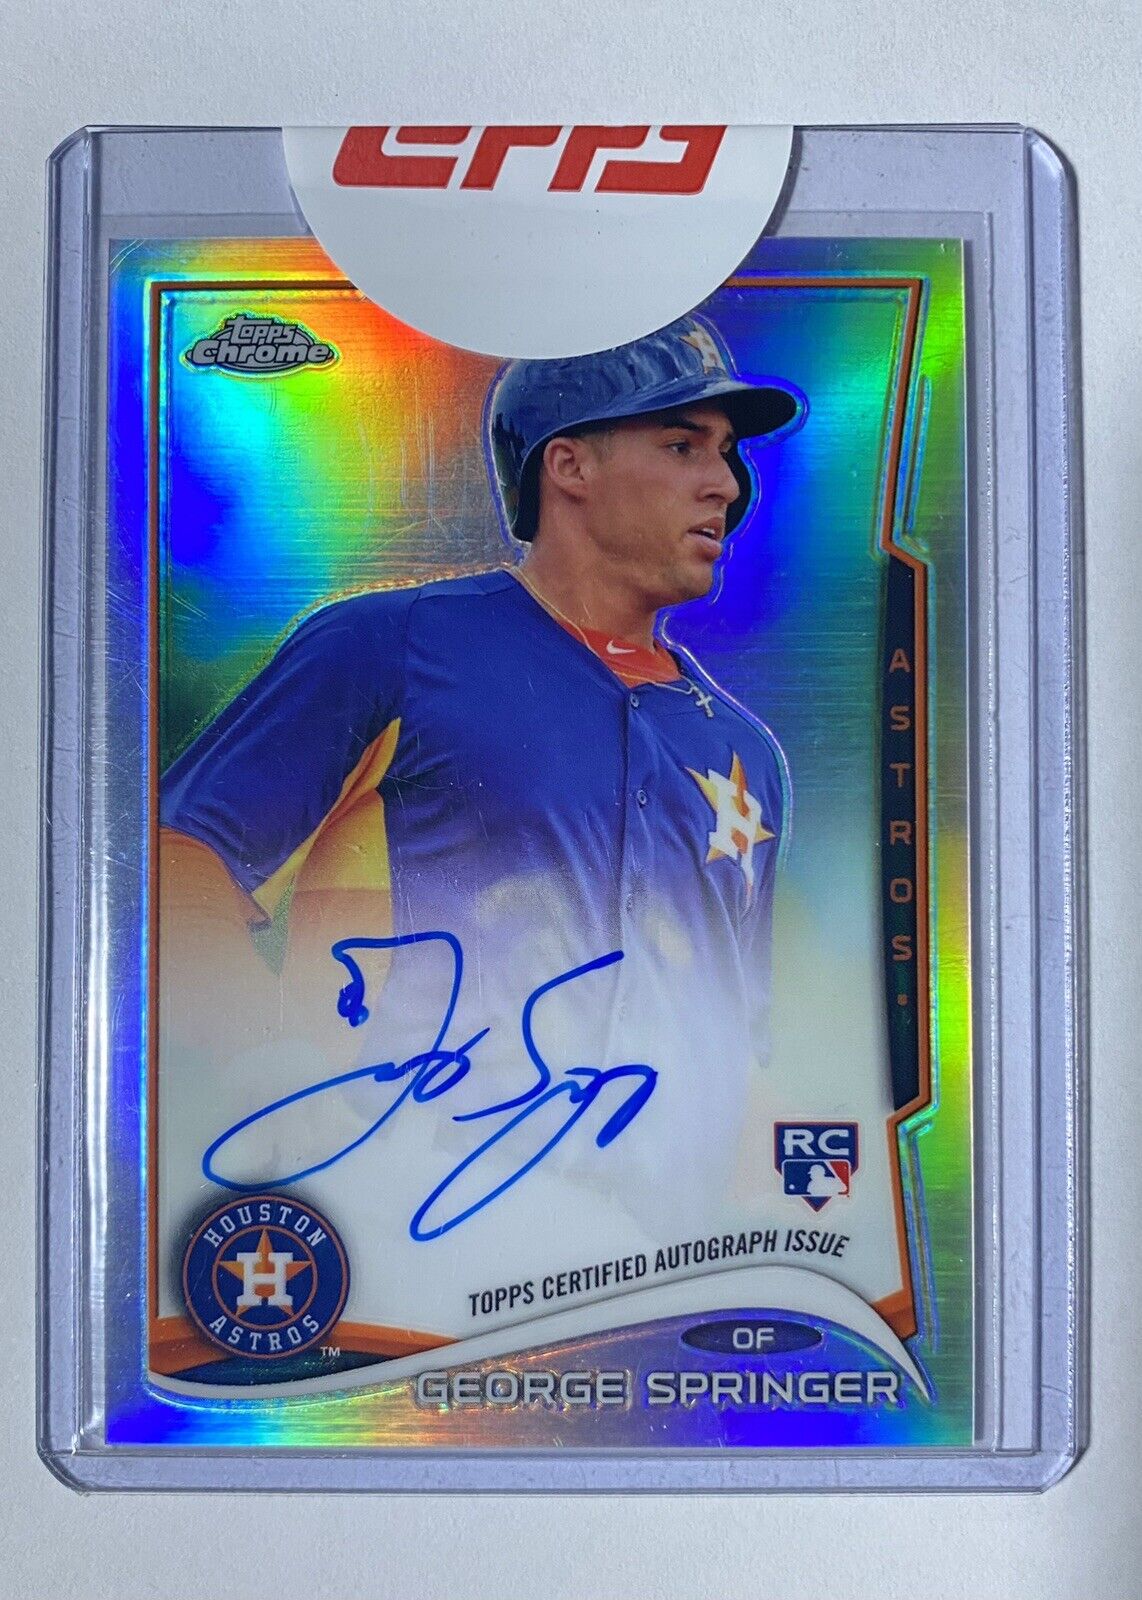 2014 Topps Chrome Refractor #GS George Springer RC Rookie AUTO 410/499